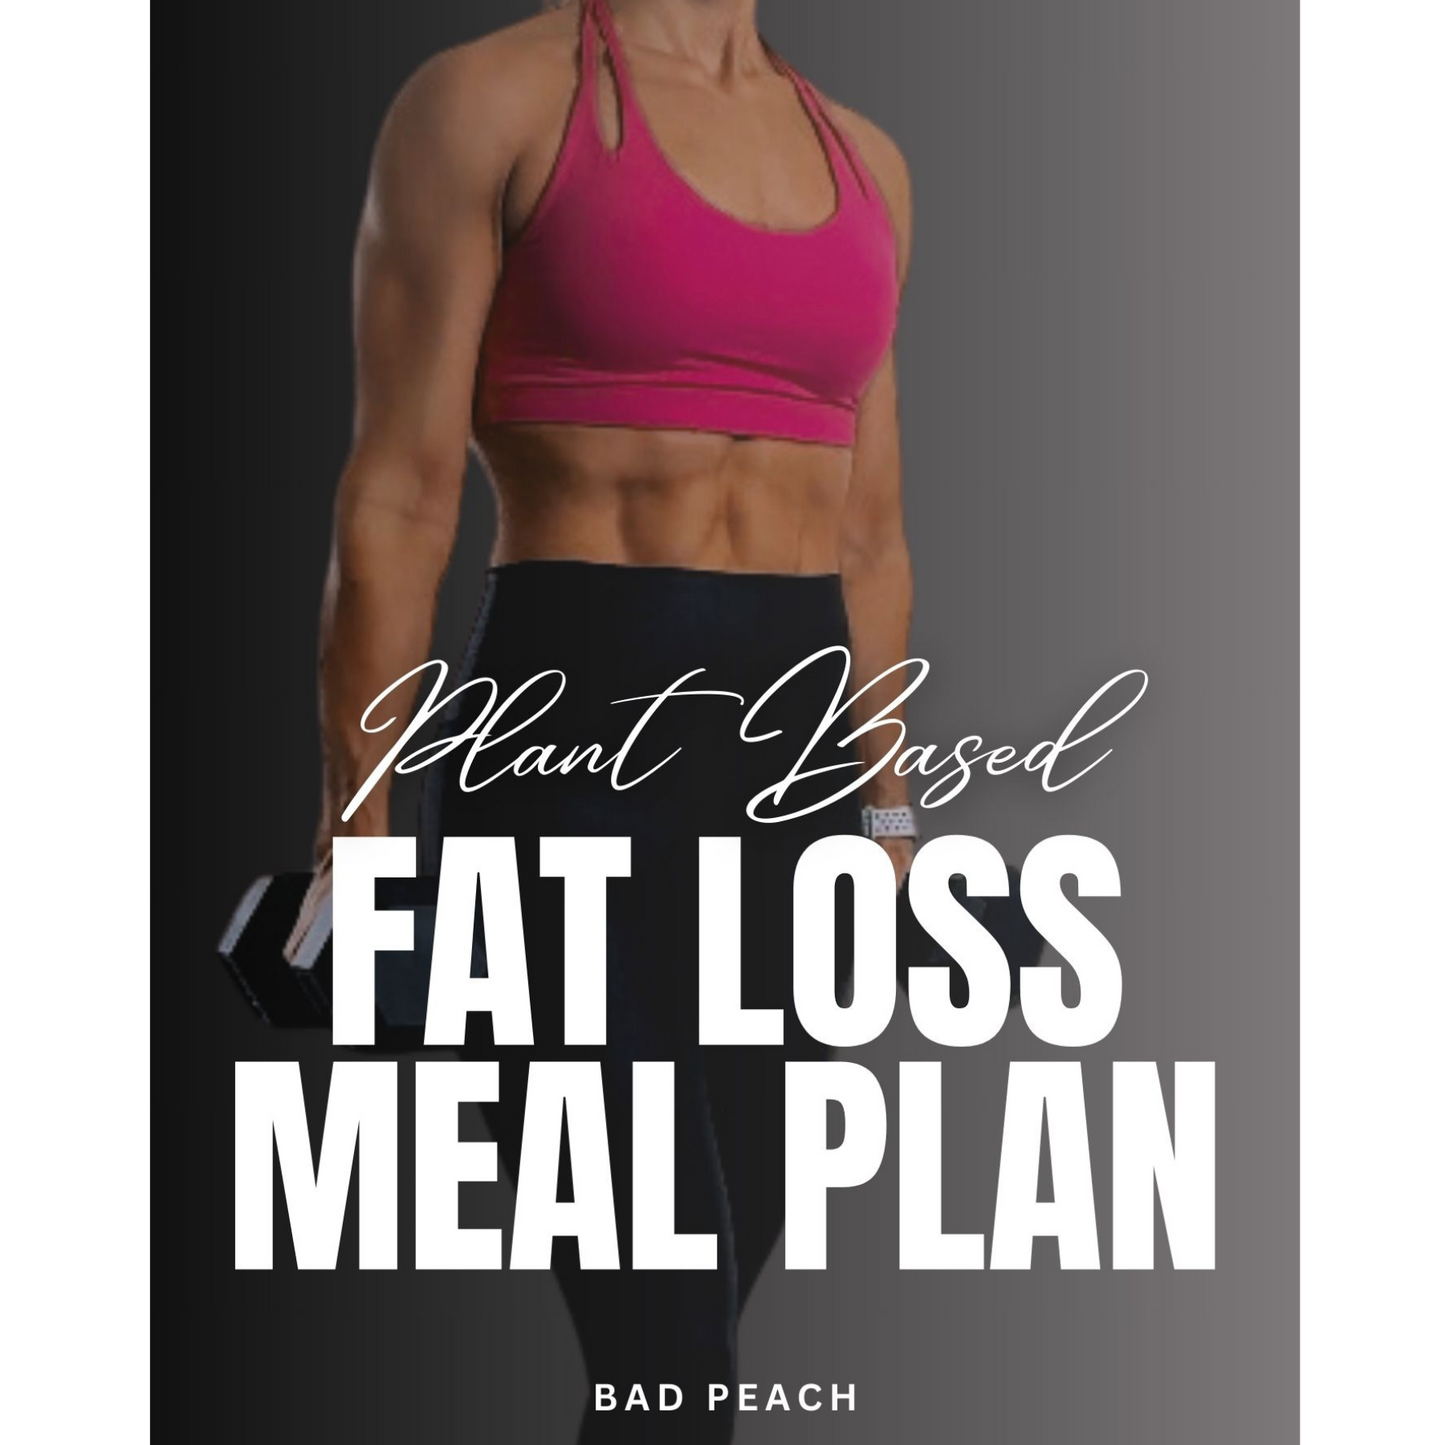 14 Days, Fat Loss Plant Based Meal Plan